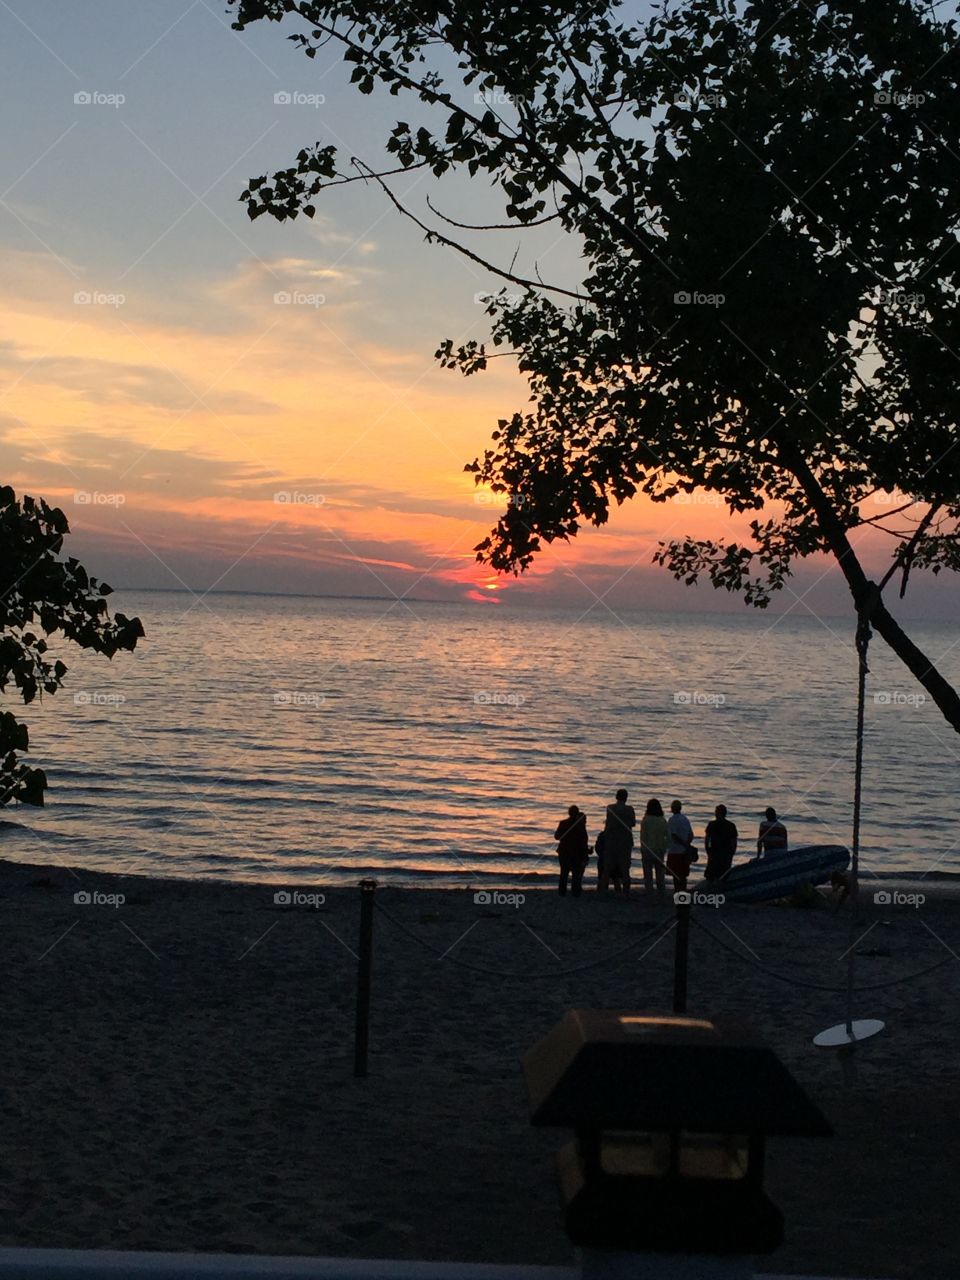 Sunset from Georgian Bay are very spectacular. It has been said "it is one of the best places to view and capture a fantastic sunset!!